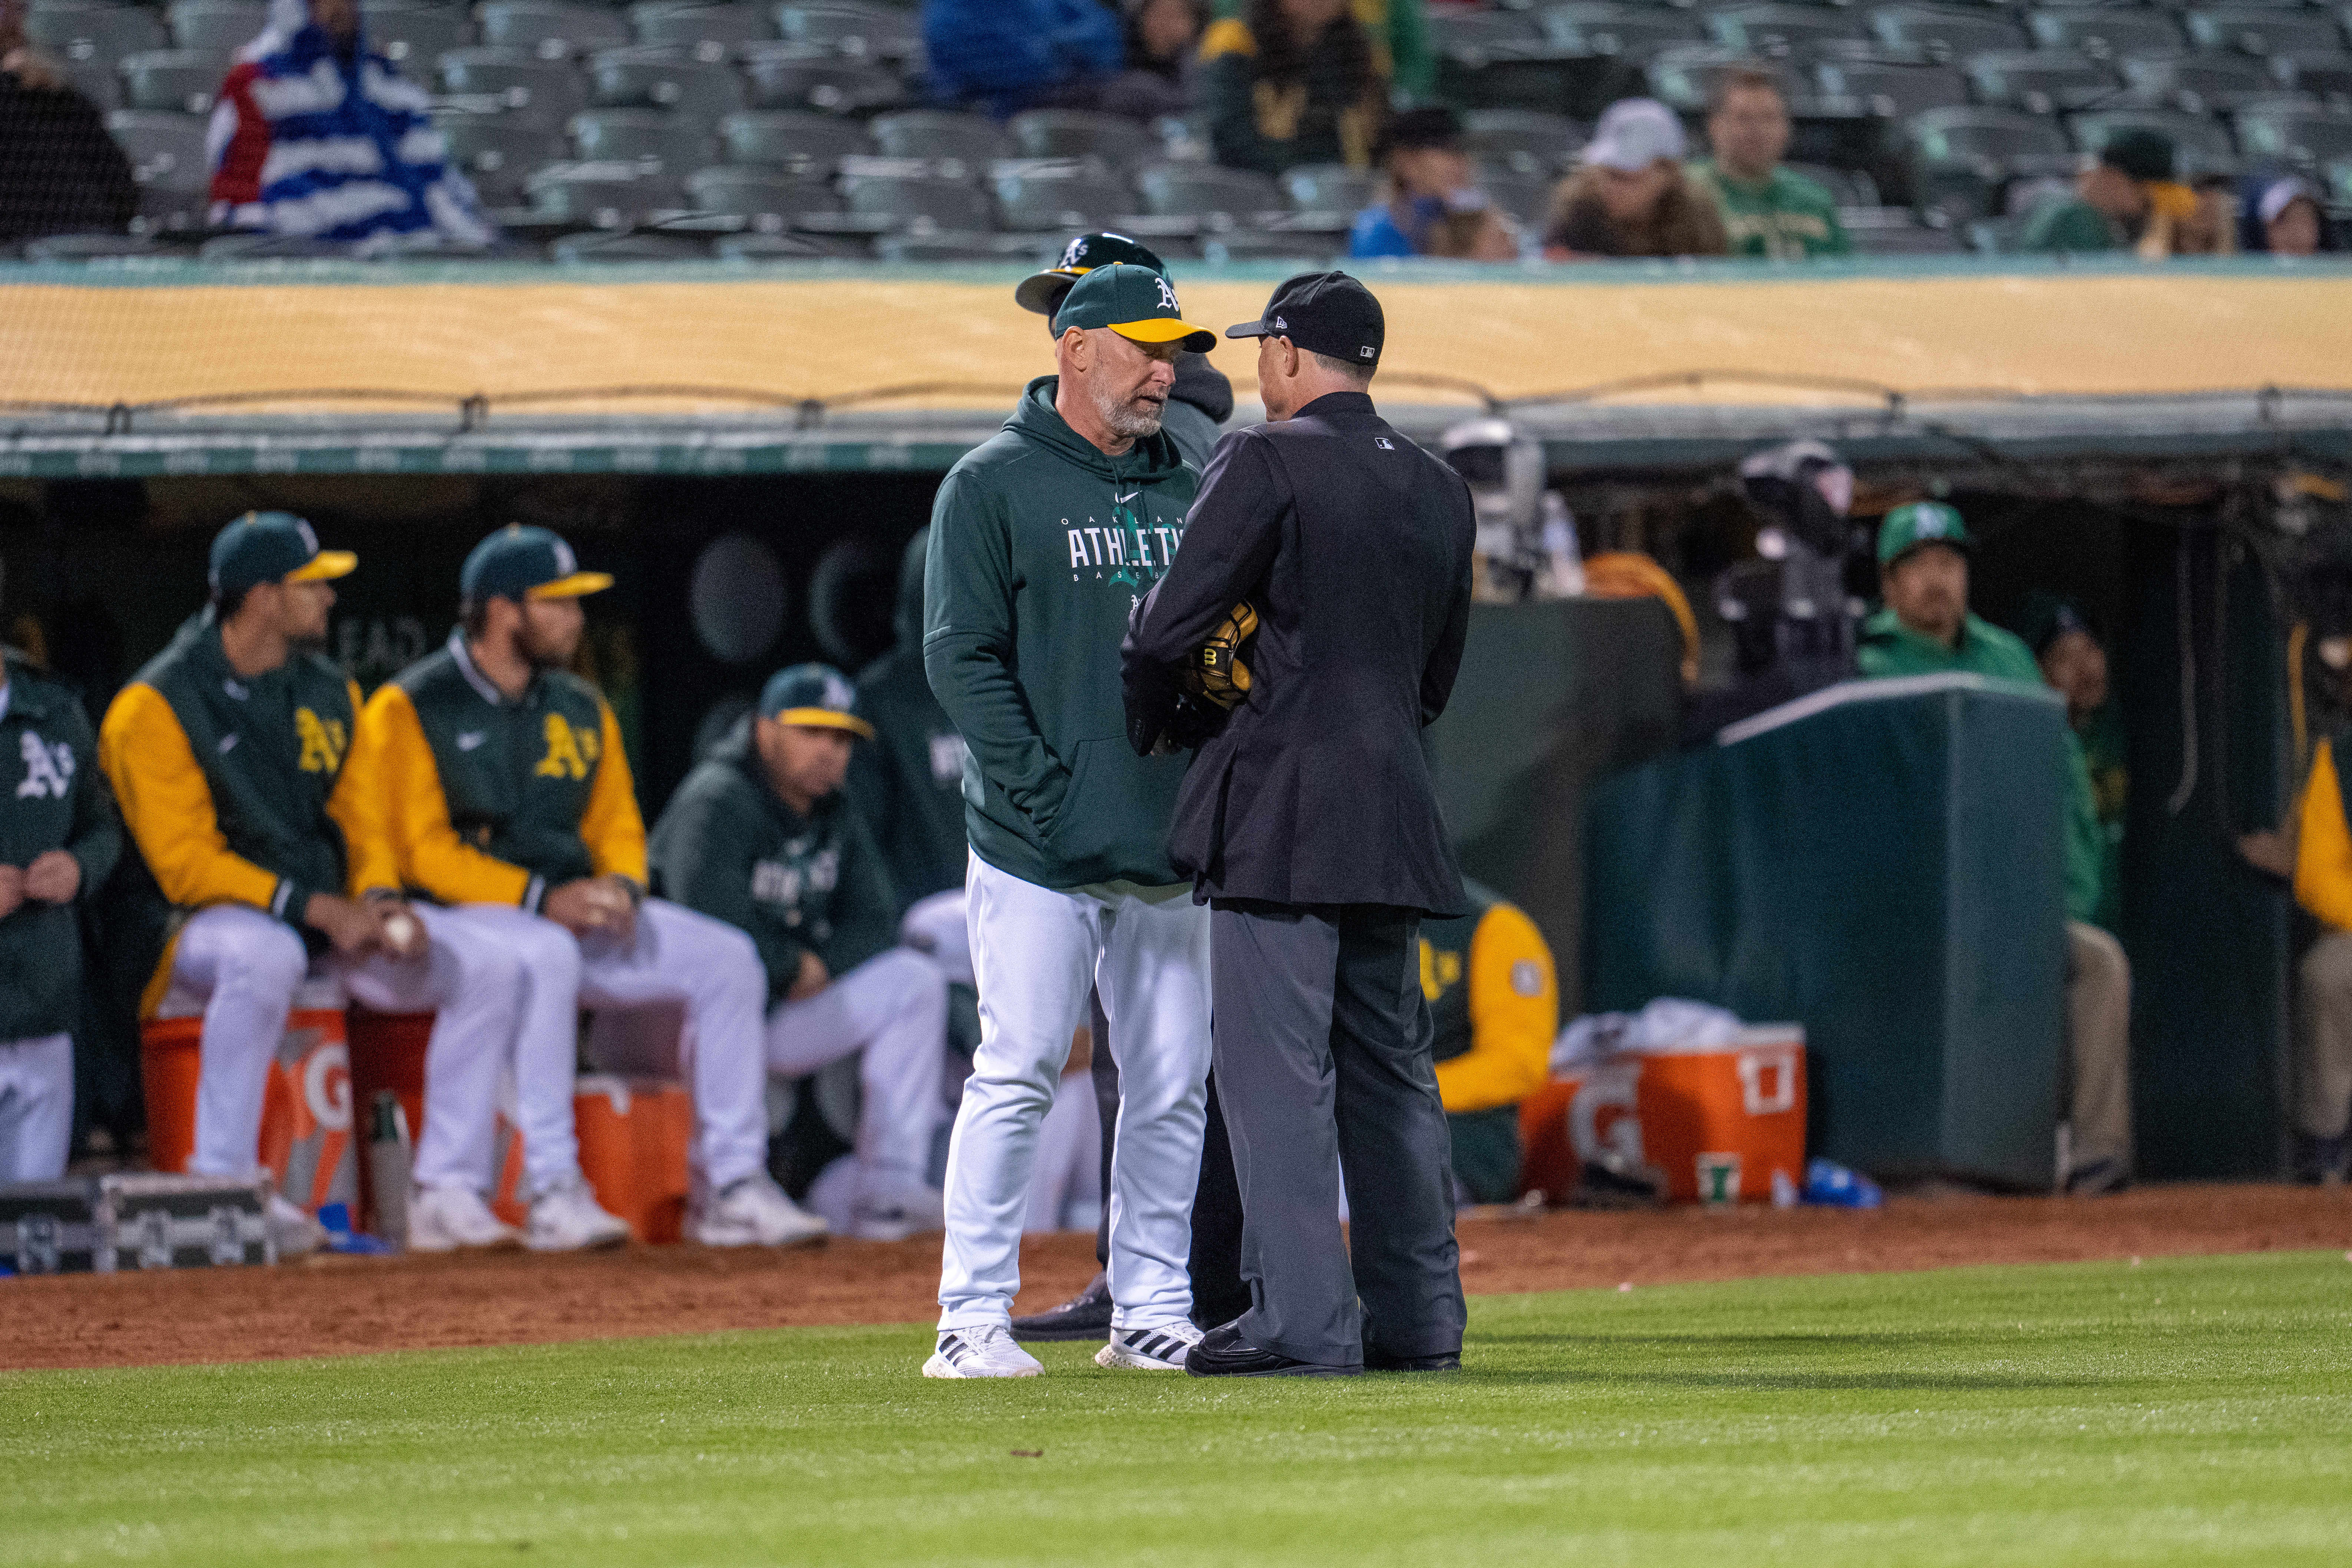 Oakland A's free agents: So long Mark Canha, and thanks for all the bat  flips - Athletics Nation